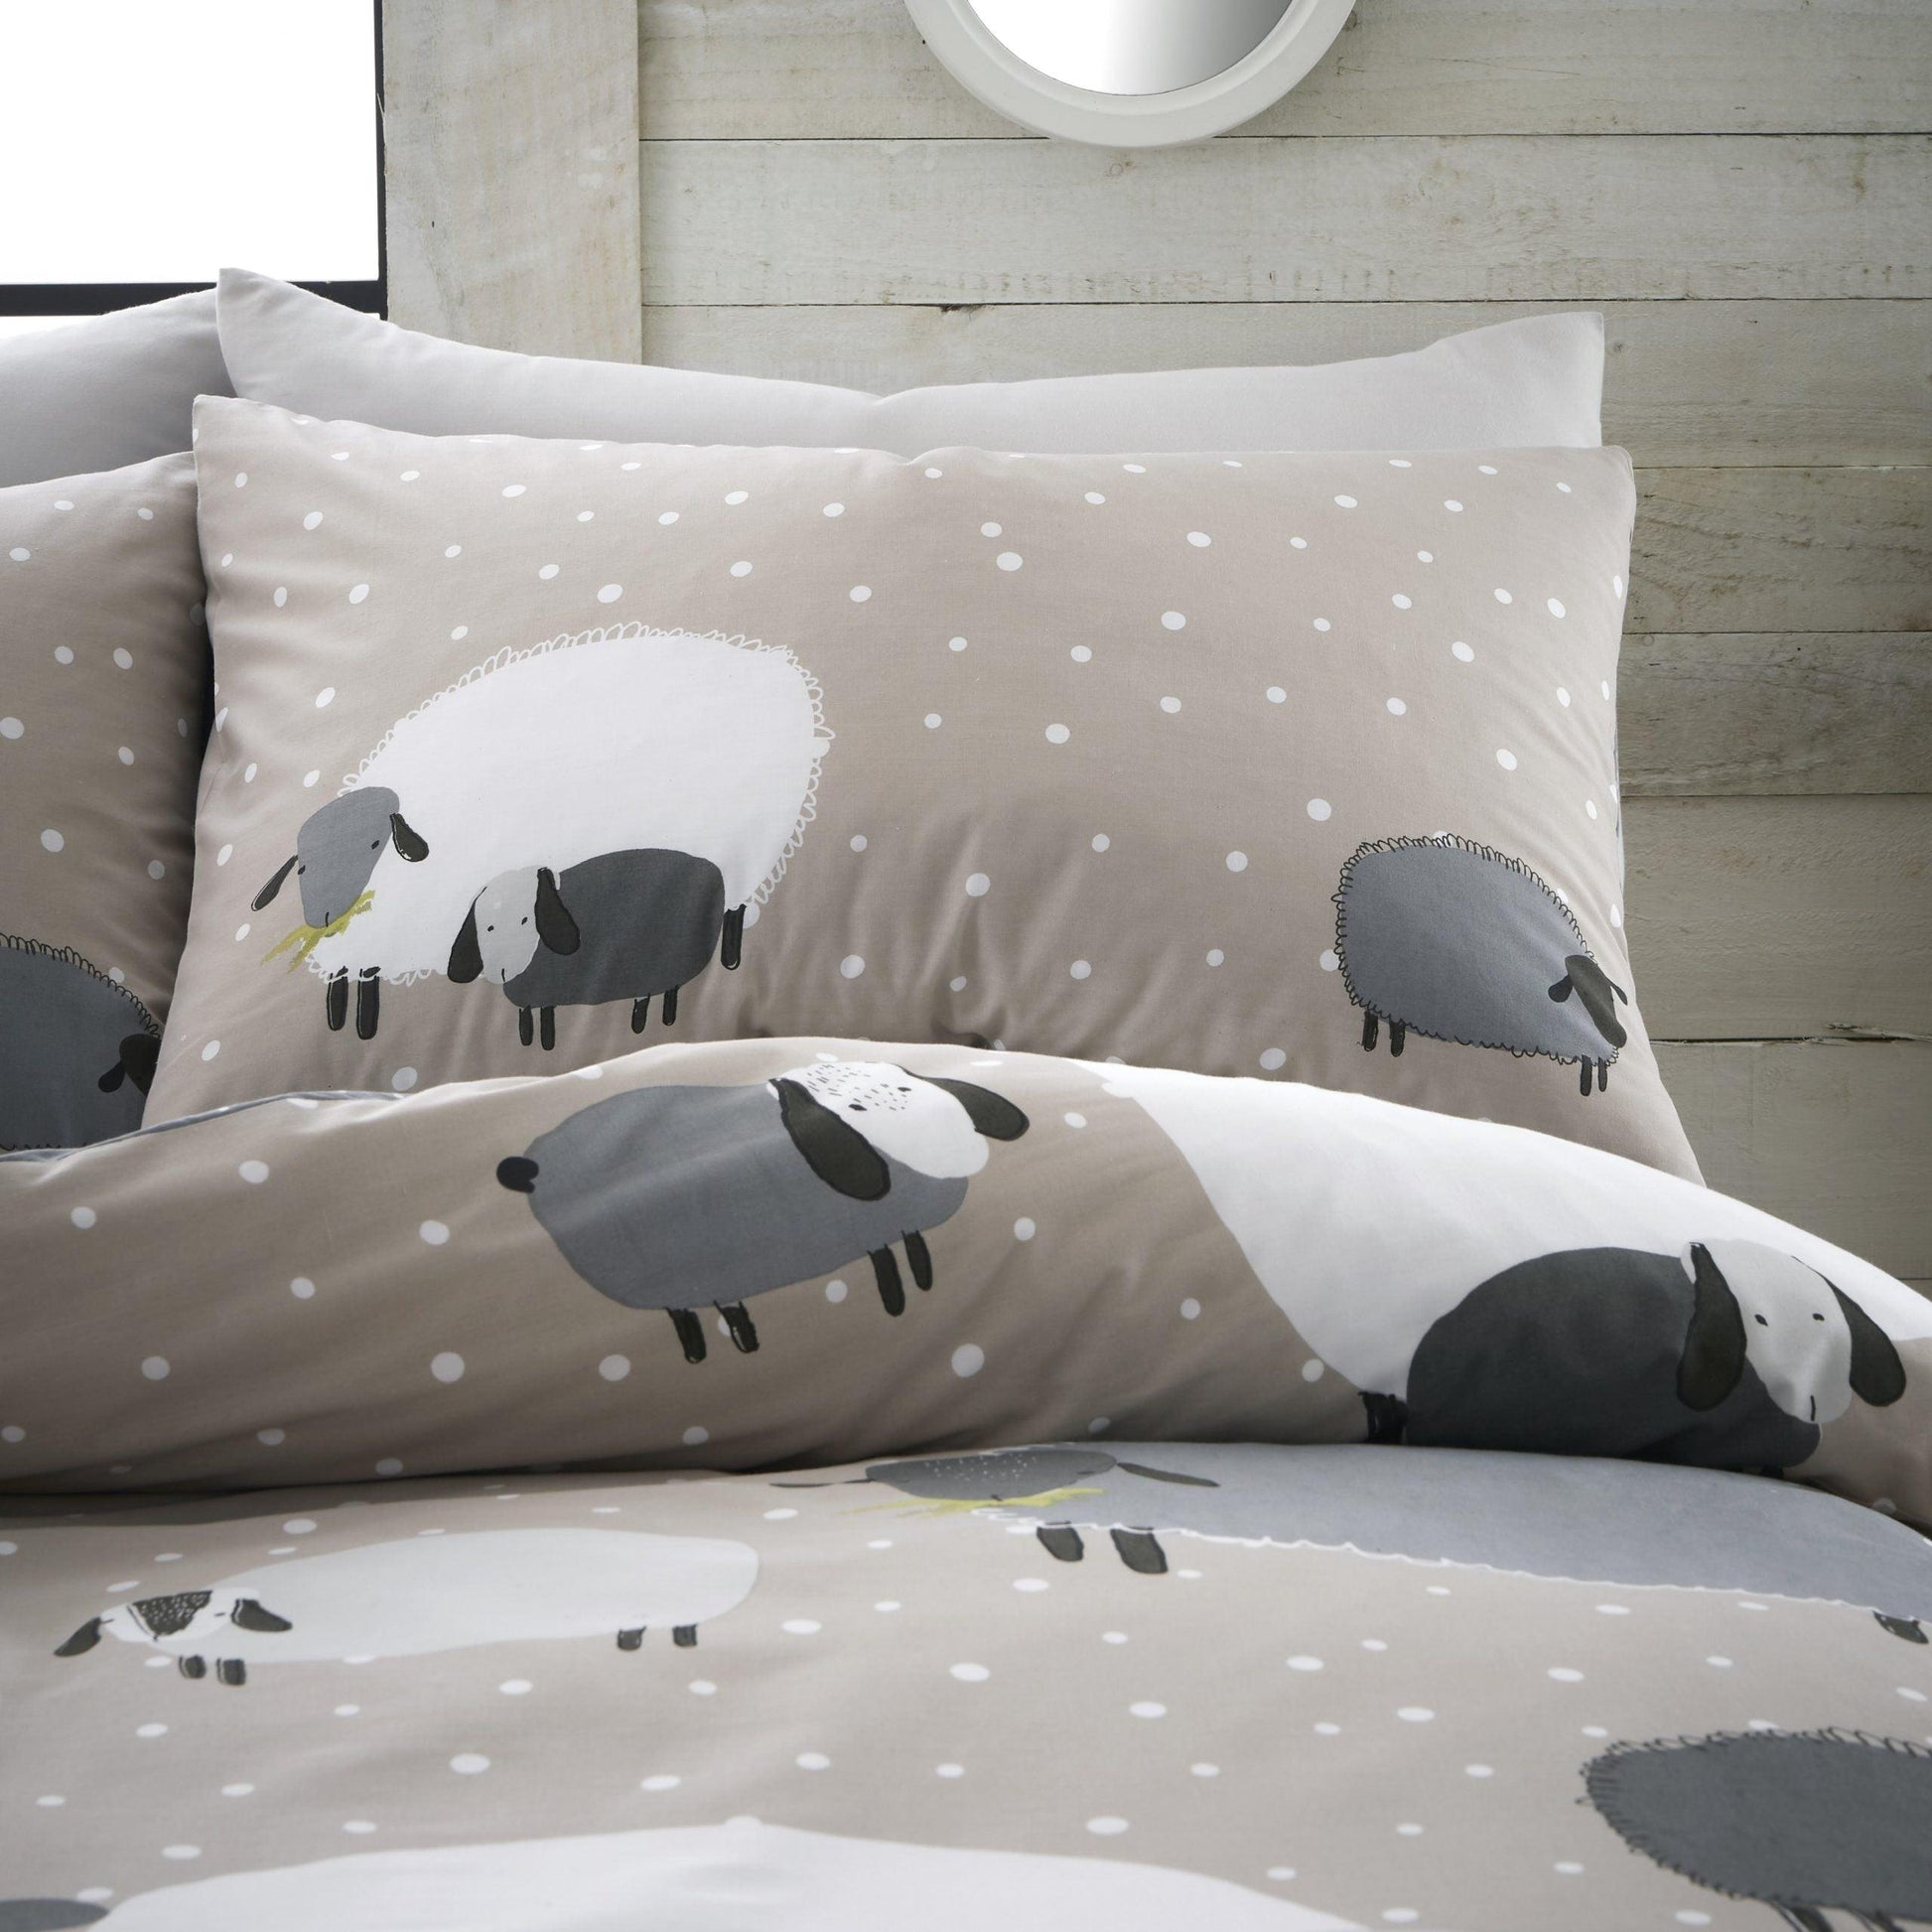 Dotty Sheep Reversible Duvet Cover Bedding Set in Grey or Natural - Home Inspired Gifts